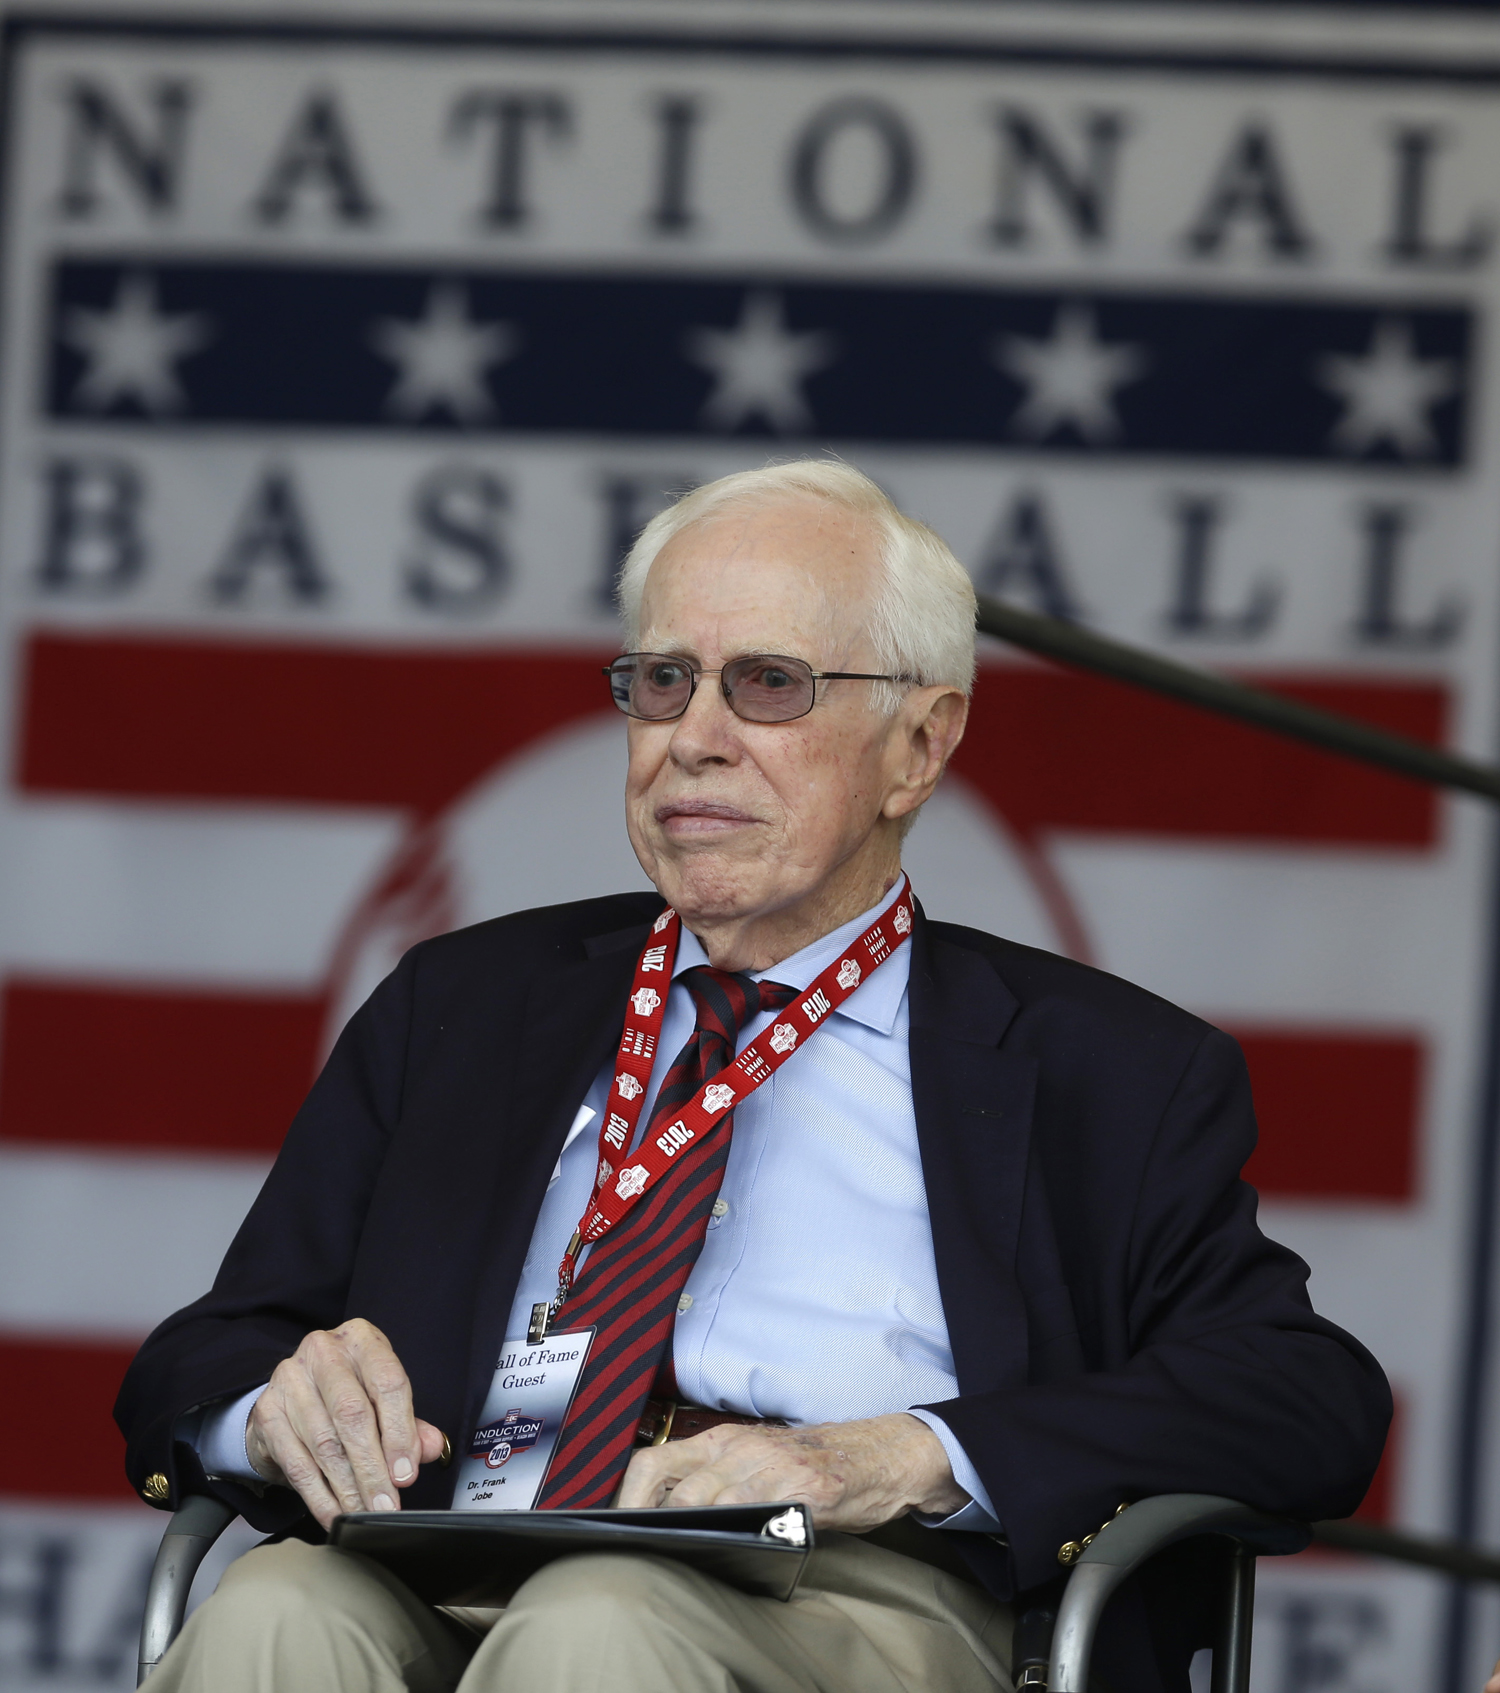 Dr. Frank Jobe, known for the development of the historic elbow procedure known as “Tommy John surgery,” is honored during a ceremony at Doubleday Field, in Cooperstown, N.Y. (Mike Groll—AP)